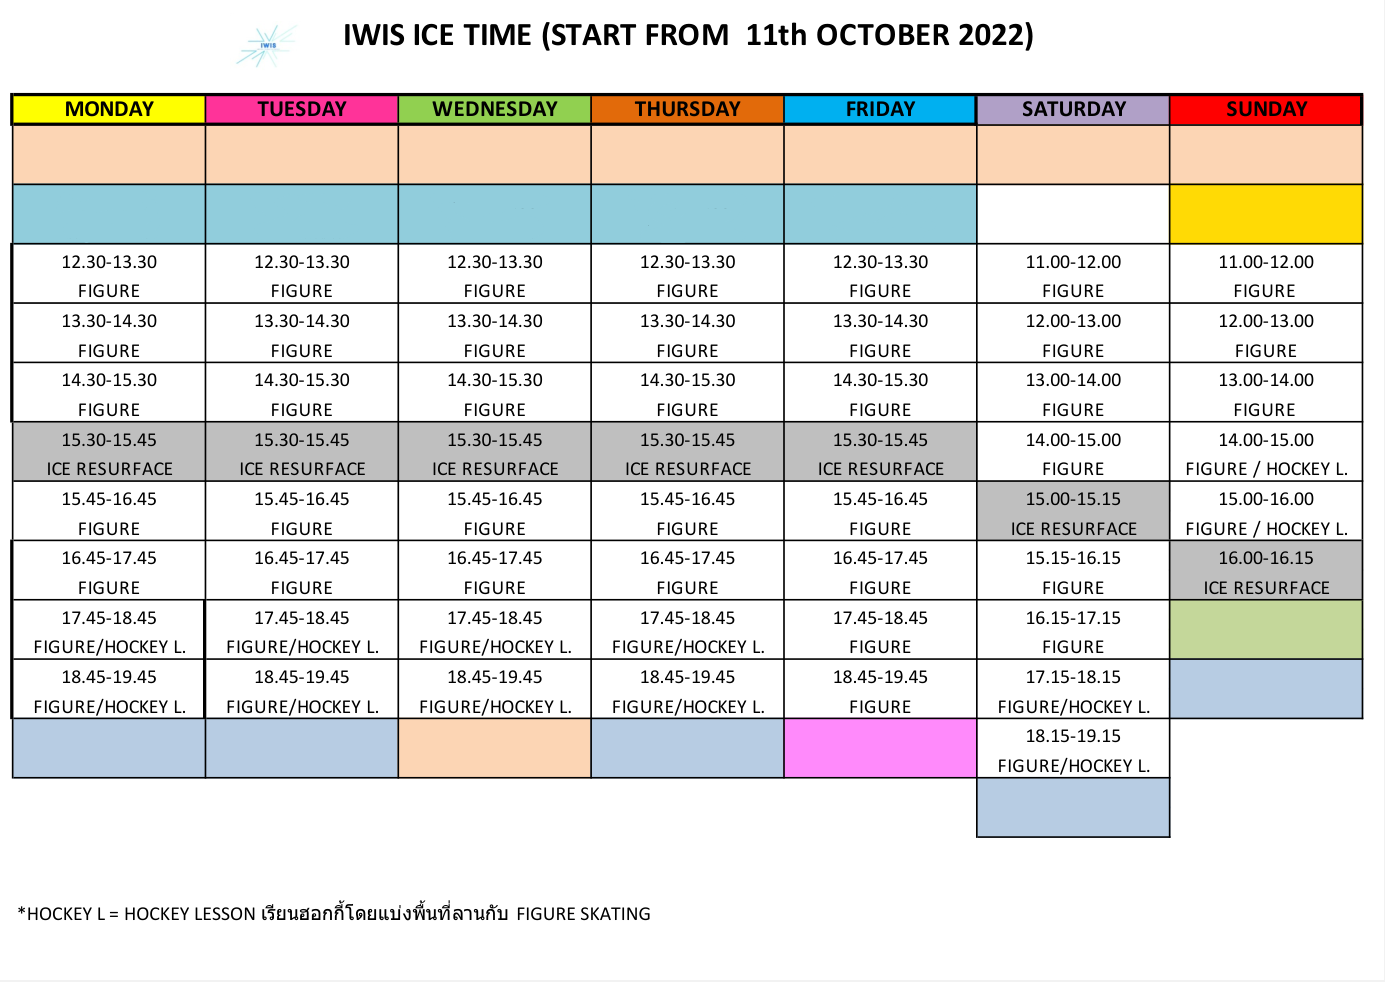 Schedule of IWIS rink from monday to sunday